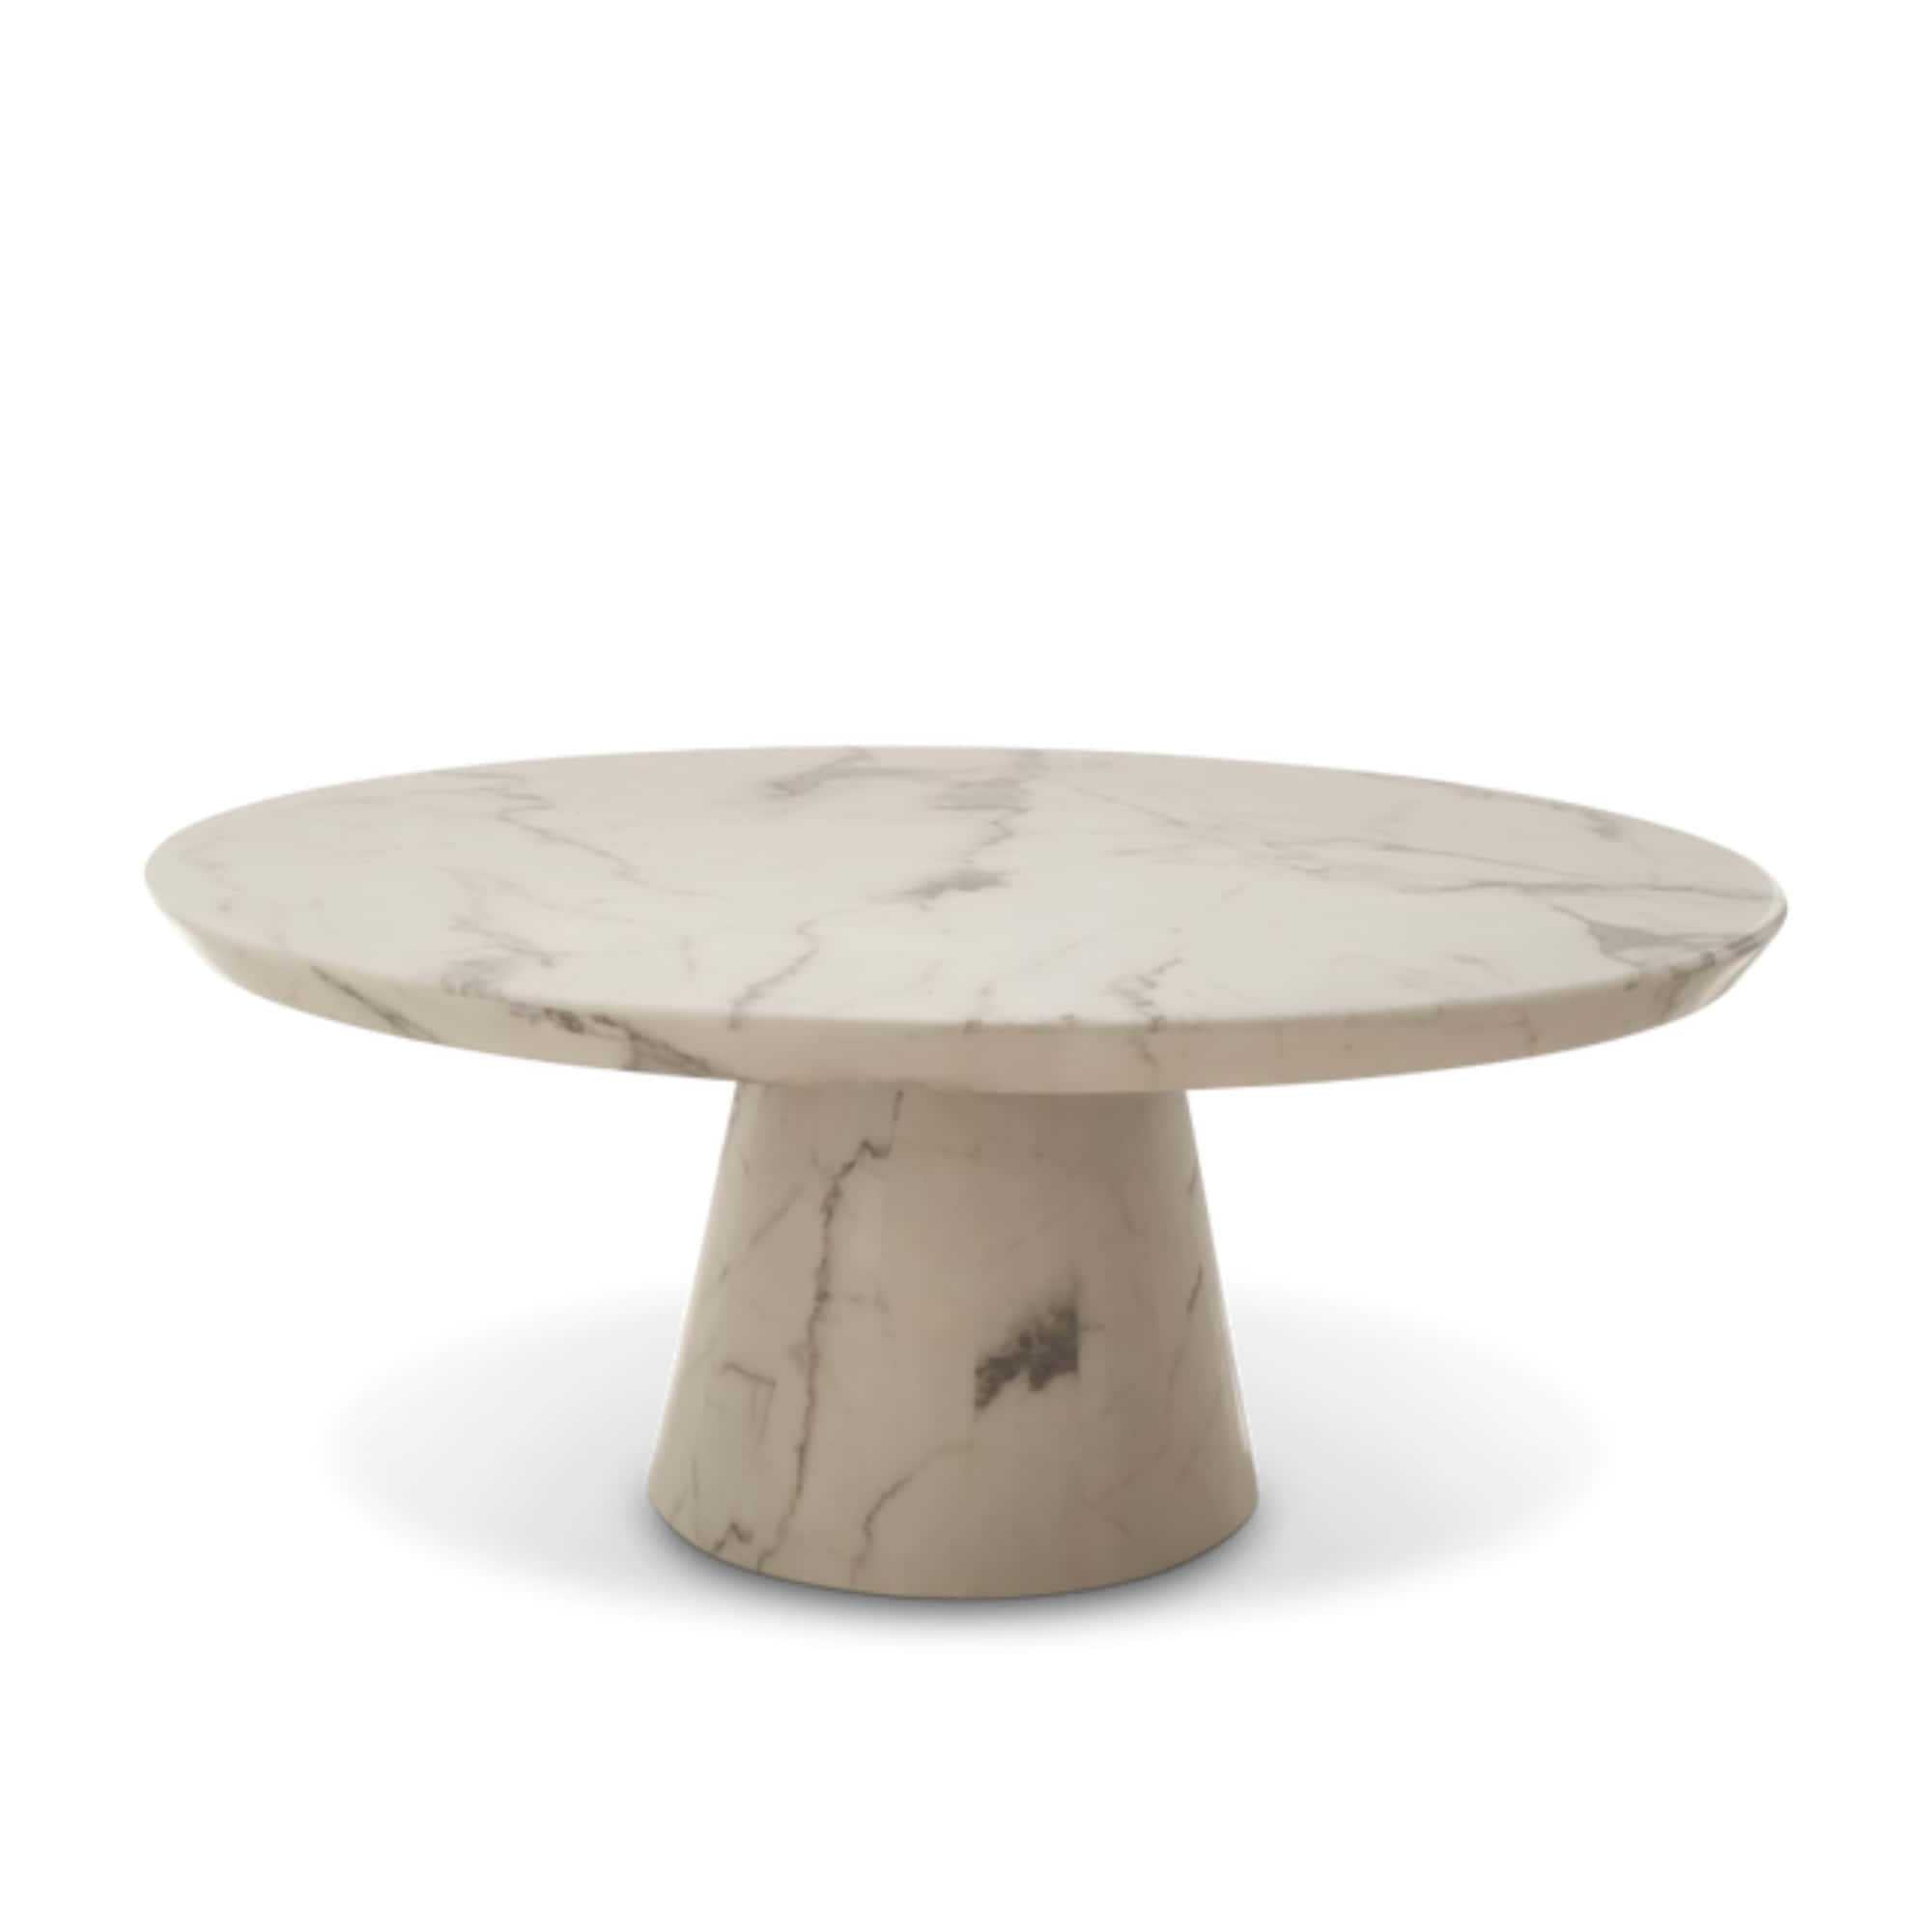 Pols Potten Disc Marble Look Coffee Table (Ø100cm), White